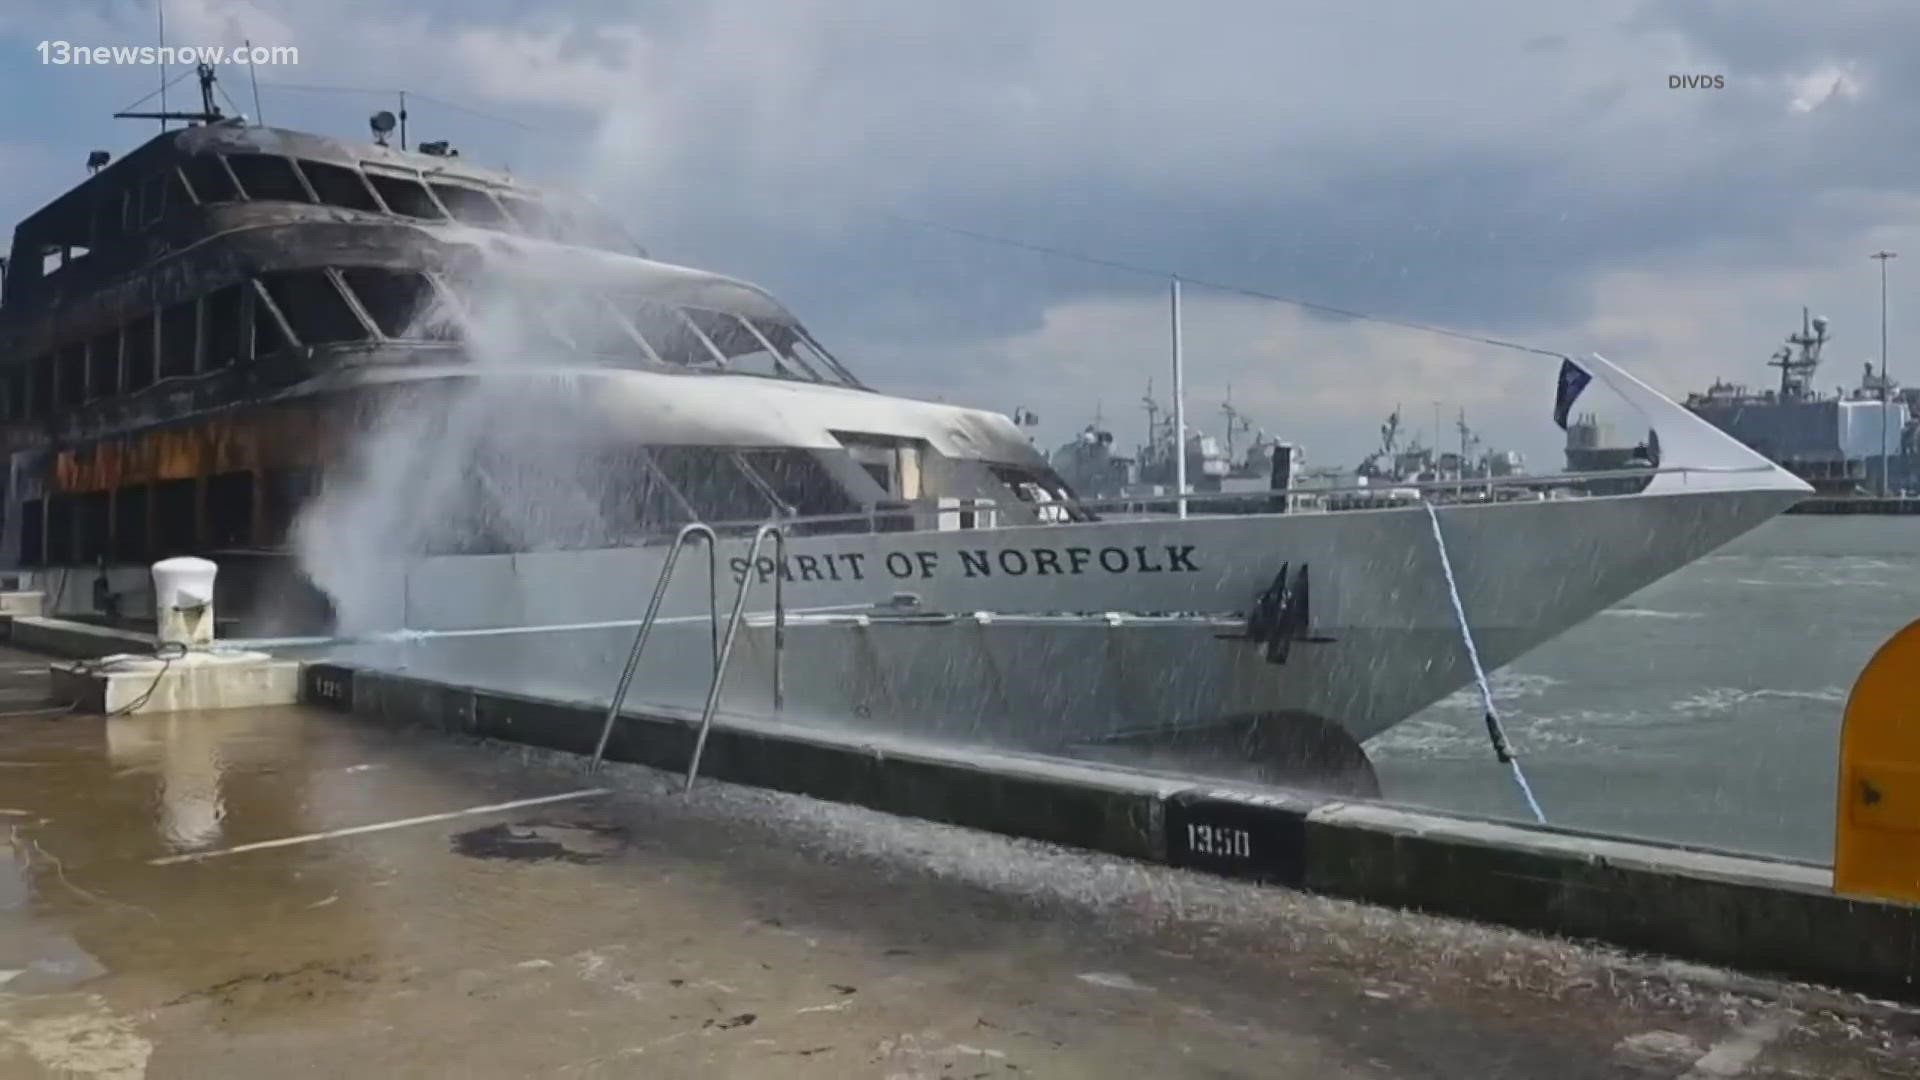 The general manager of the company that owns Spirit of Norfolk testified for the first time as the hearing into the 2022 yacht fire continues.